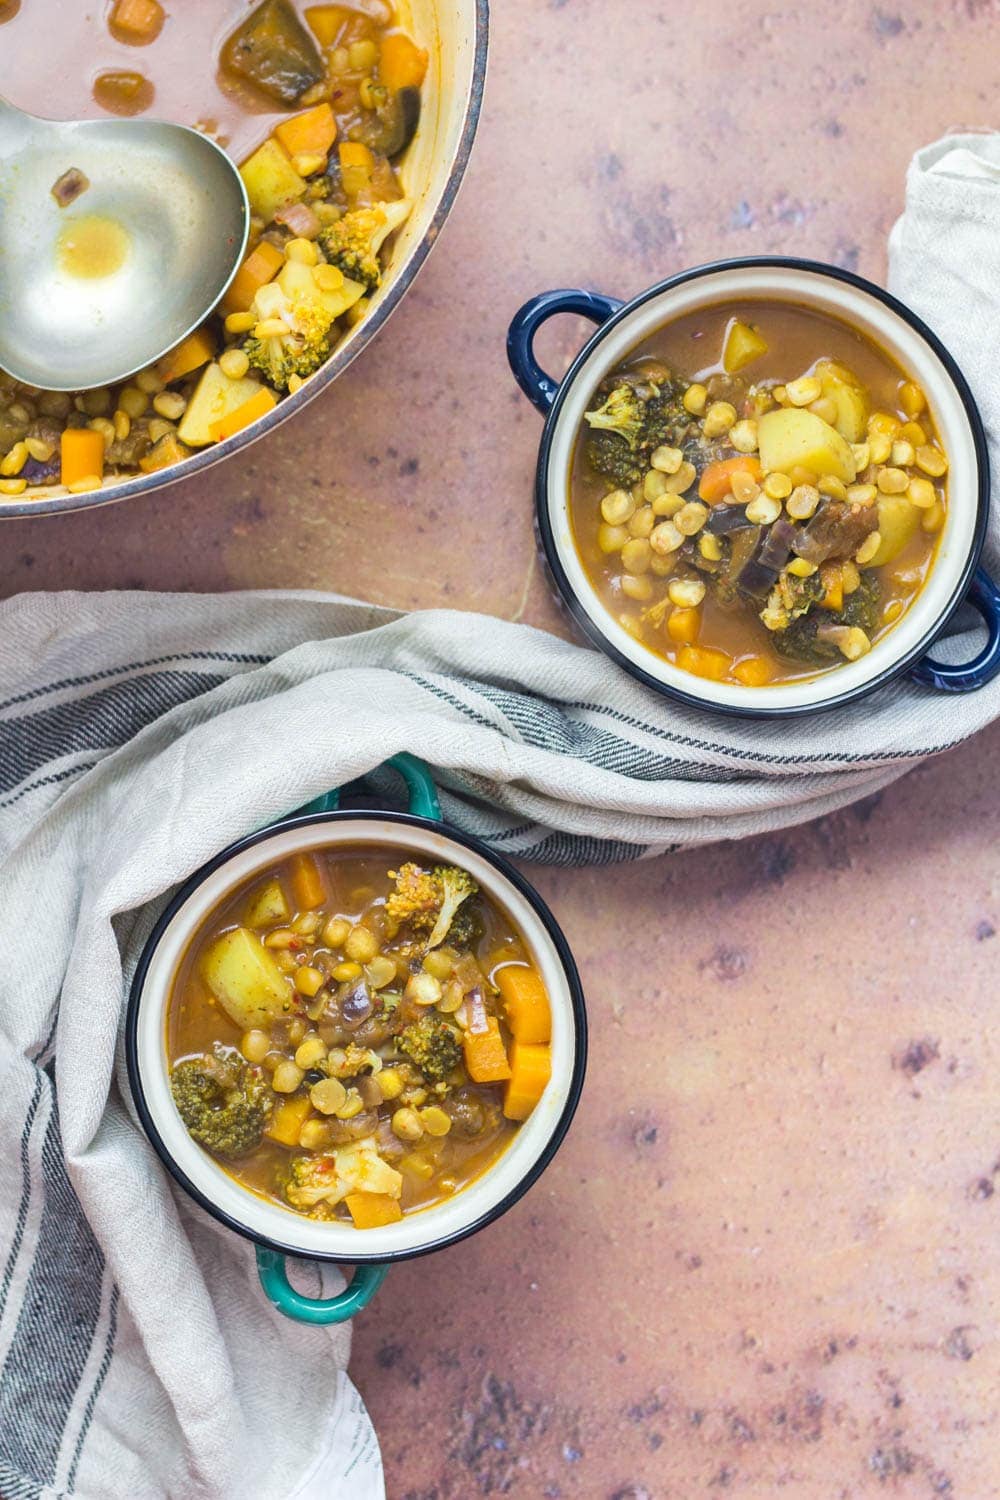 This Turkish split pea and vegetable soup is so warming and filled with healthy ingredients to make a tasty autumn meal perfect for the cooler weather.